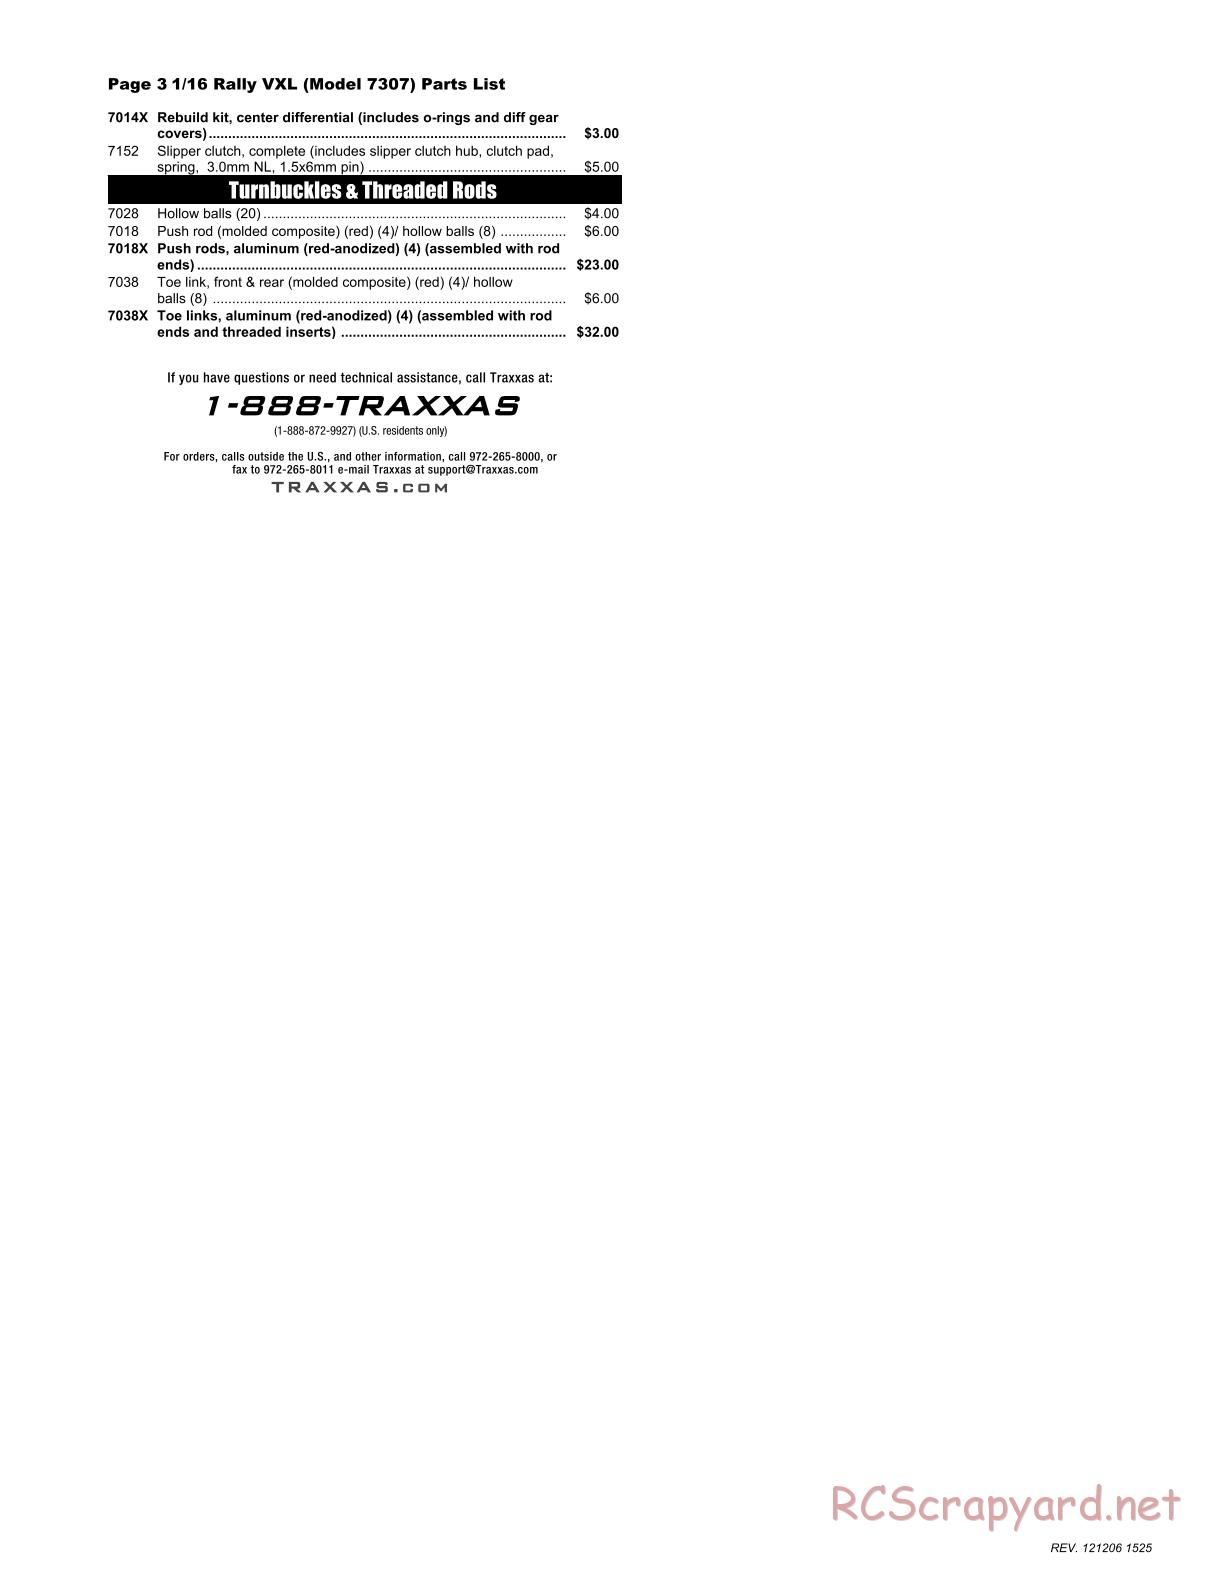 Traxxas - 1/16 Rally VXL (2010) - Parts List - Page 3